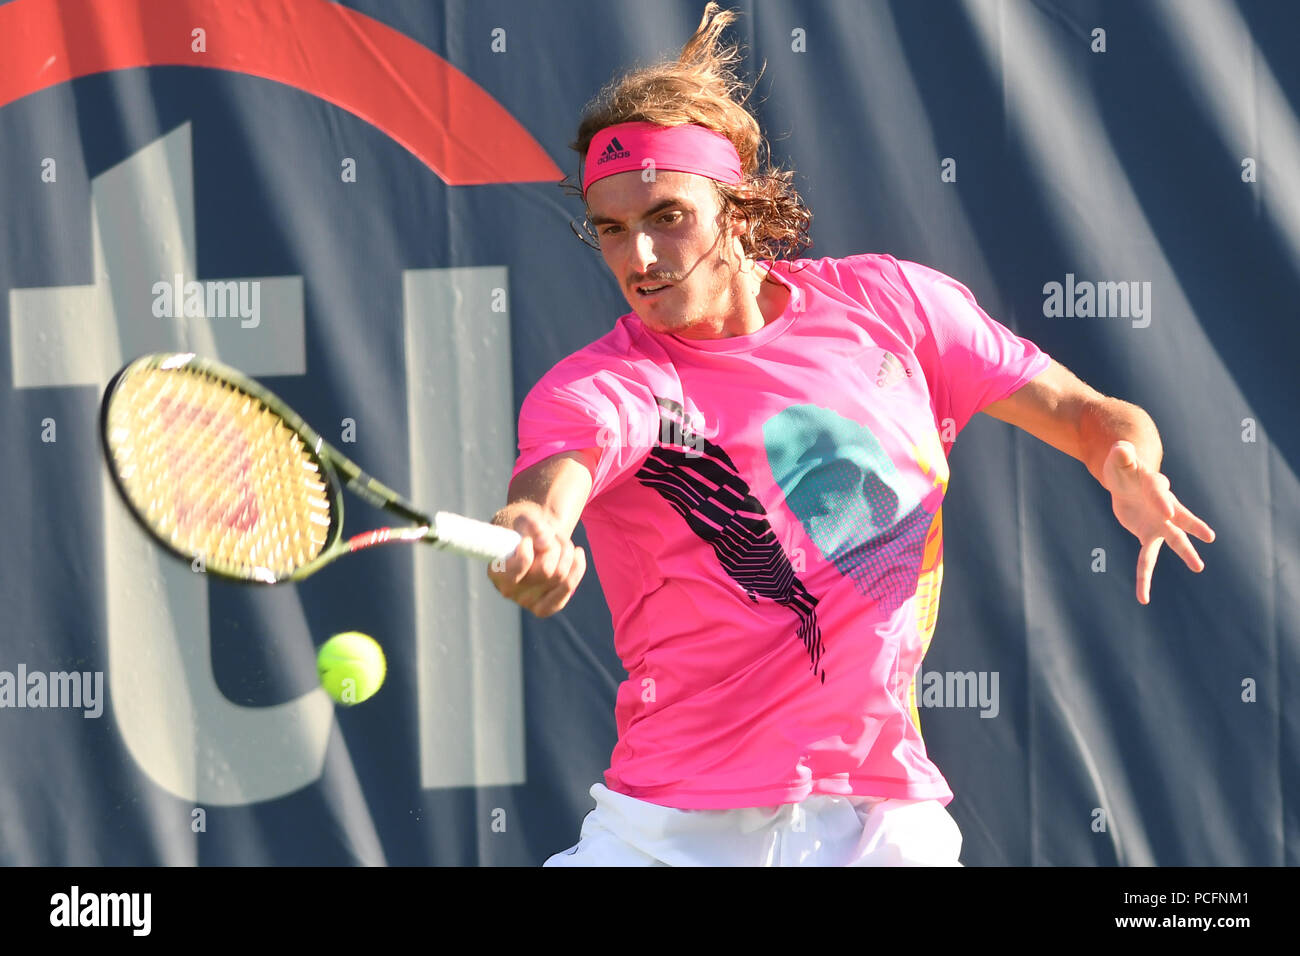 Washington, D.C, USA. 1st Aug, 2018. STEFANOS TSITSIPAS hits a forehand  during his 2nd round match at the Citi Open at the Rock Creek Park Tennis  Center in Washington, DC Credit: Kyle